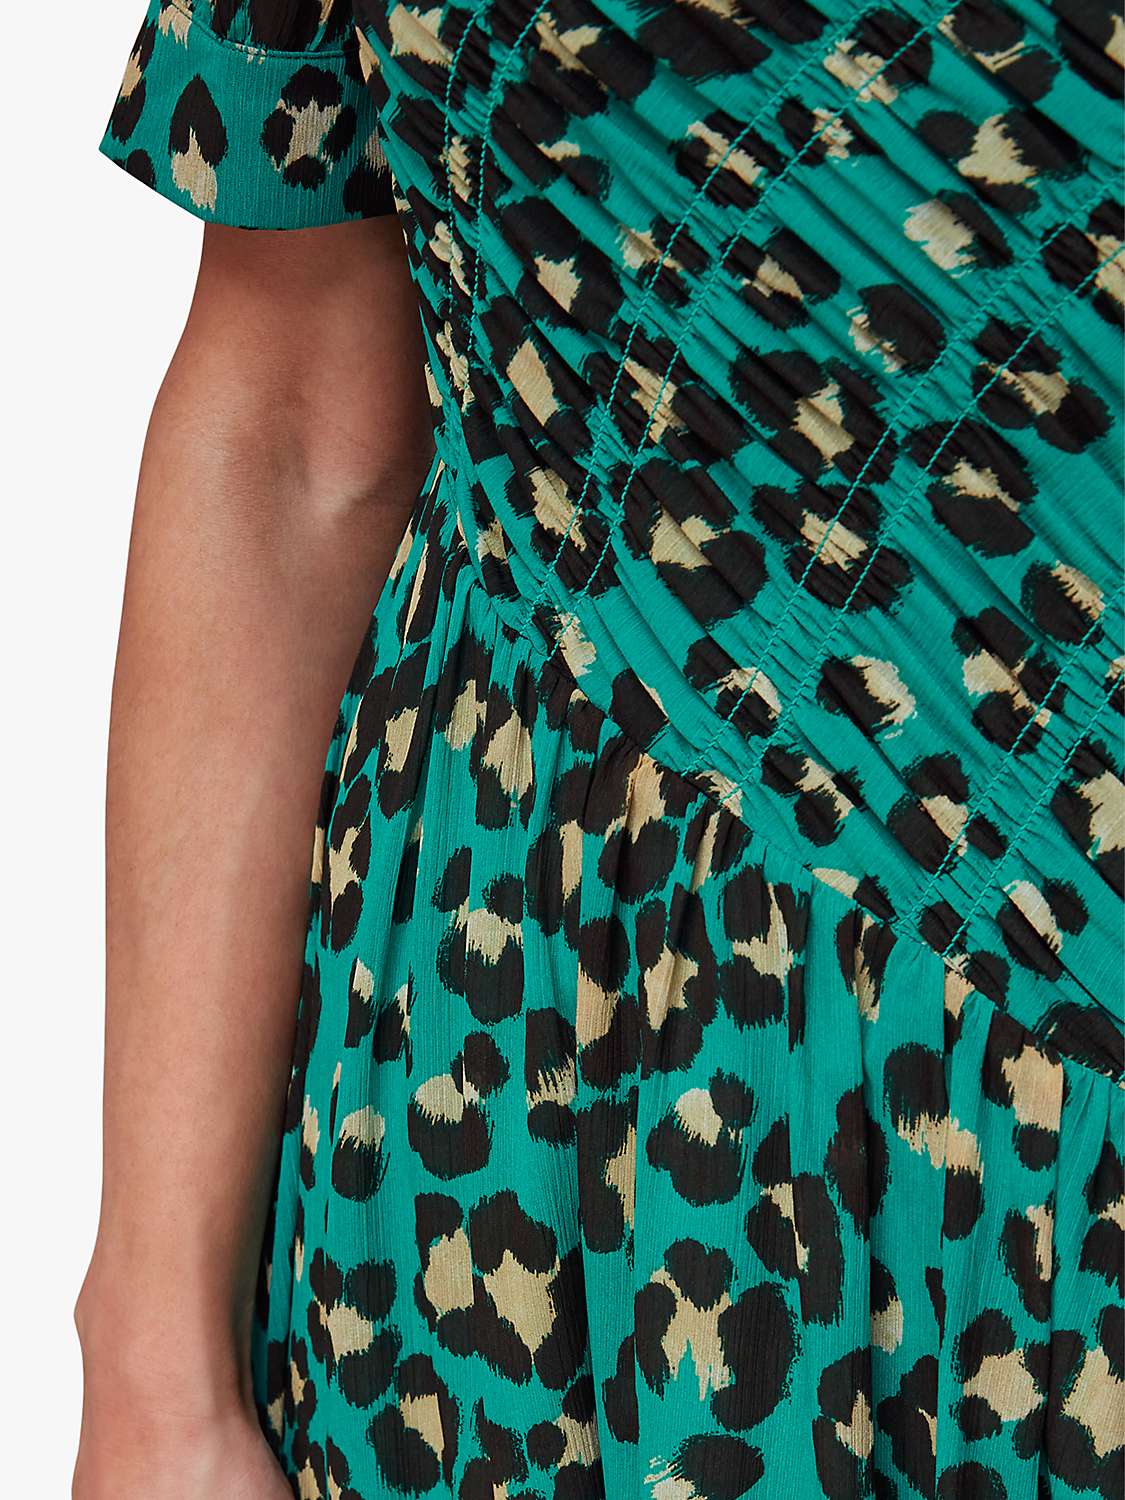 Buy Whistles Petite Painted Leopard Midi Shirred Dress, Green/Multi Online at johnlewis.com